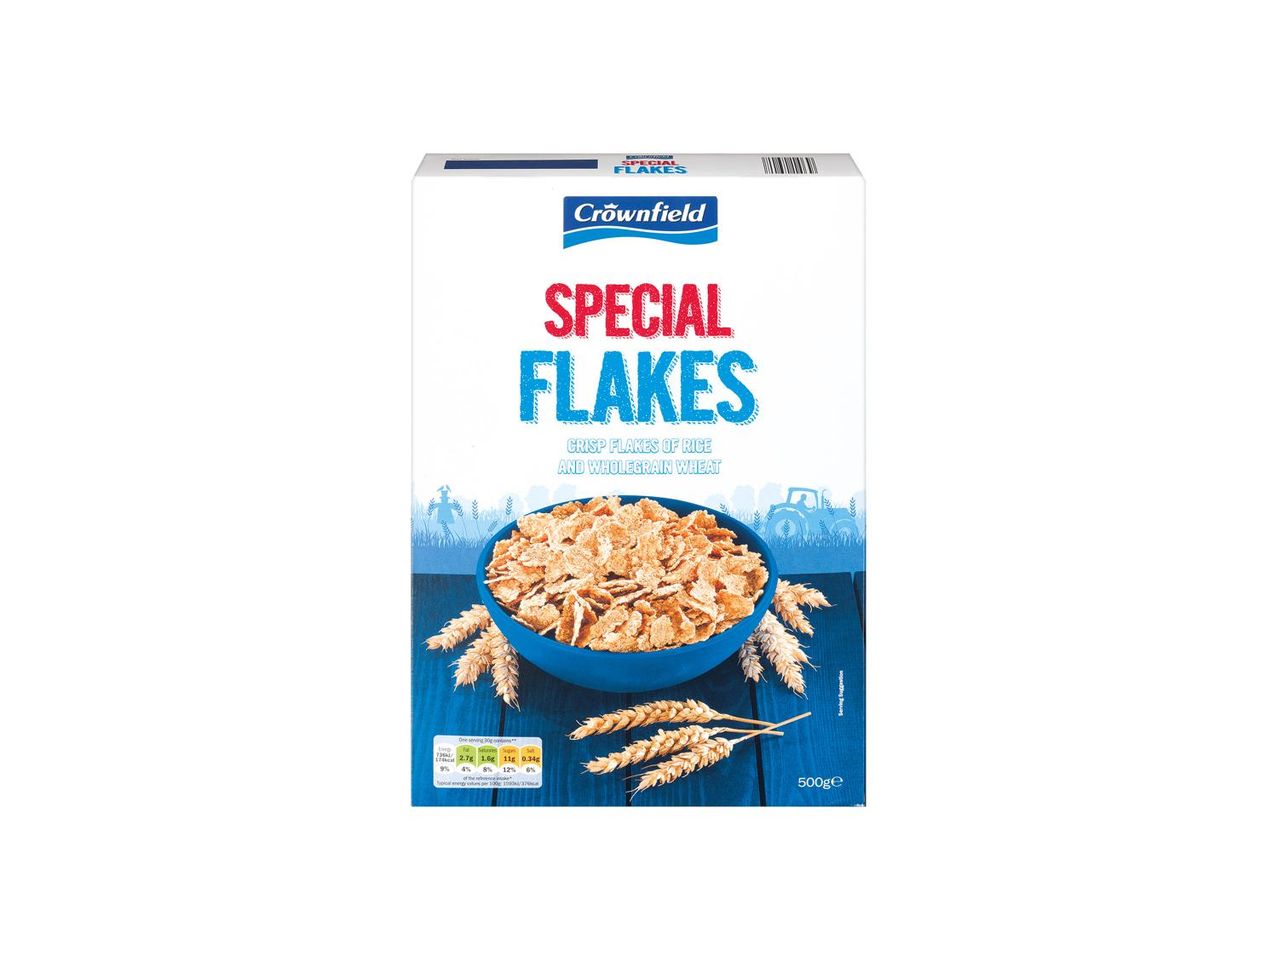 Go to full screen view: Crownfield Special Flakes - Image 1